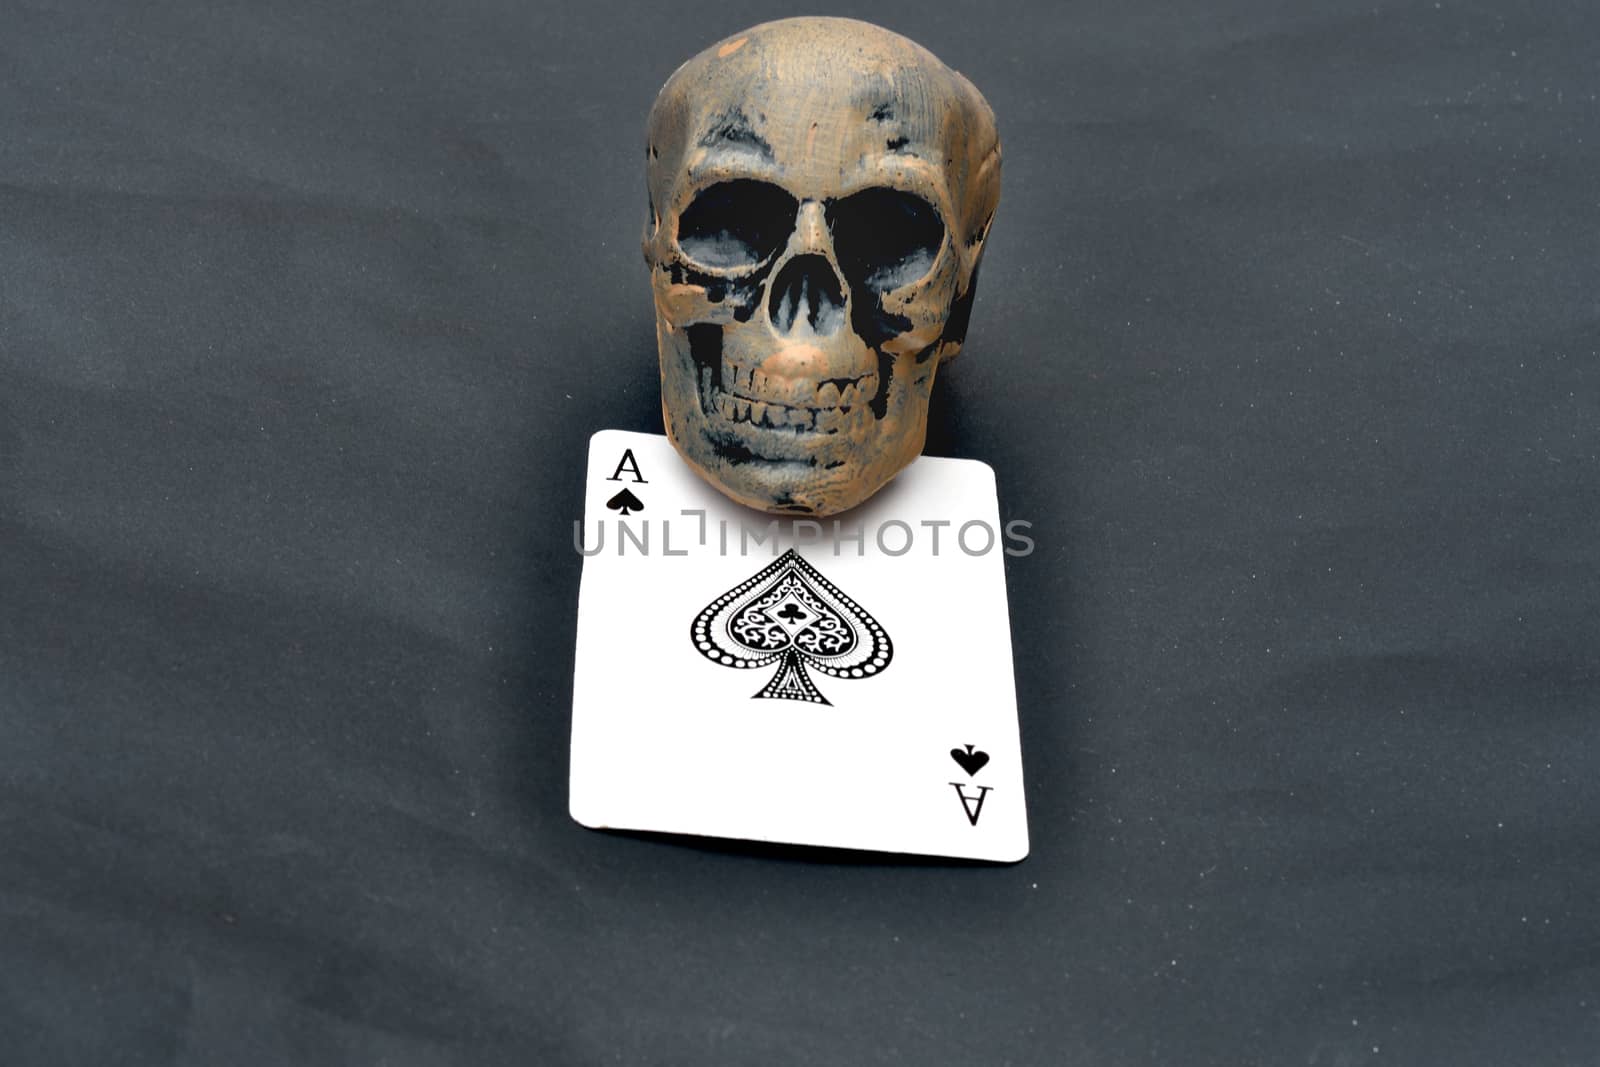 Skull and ace of spades